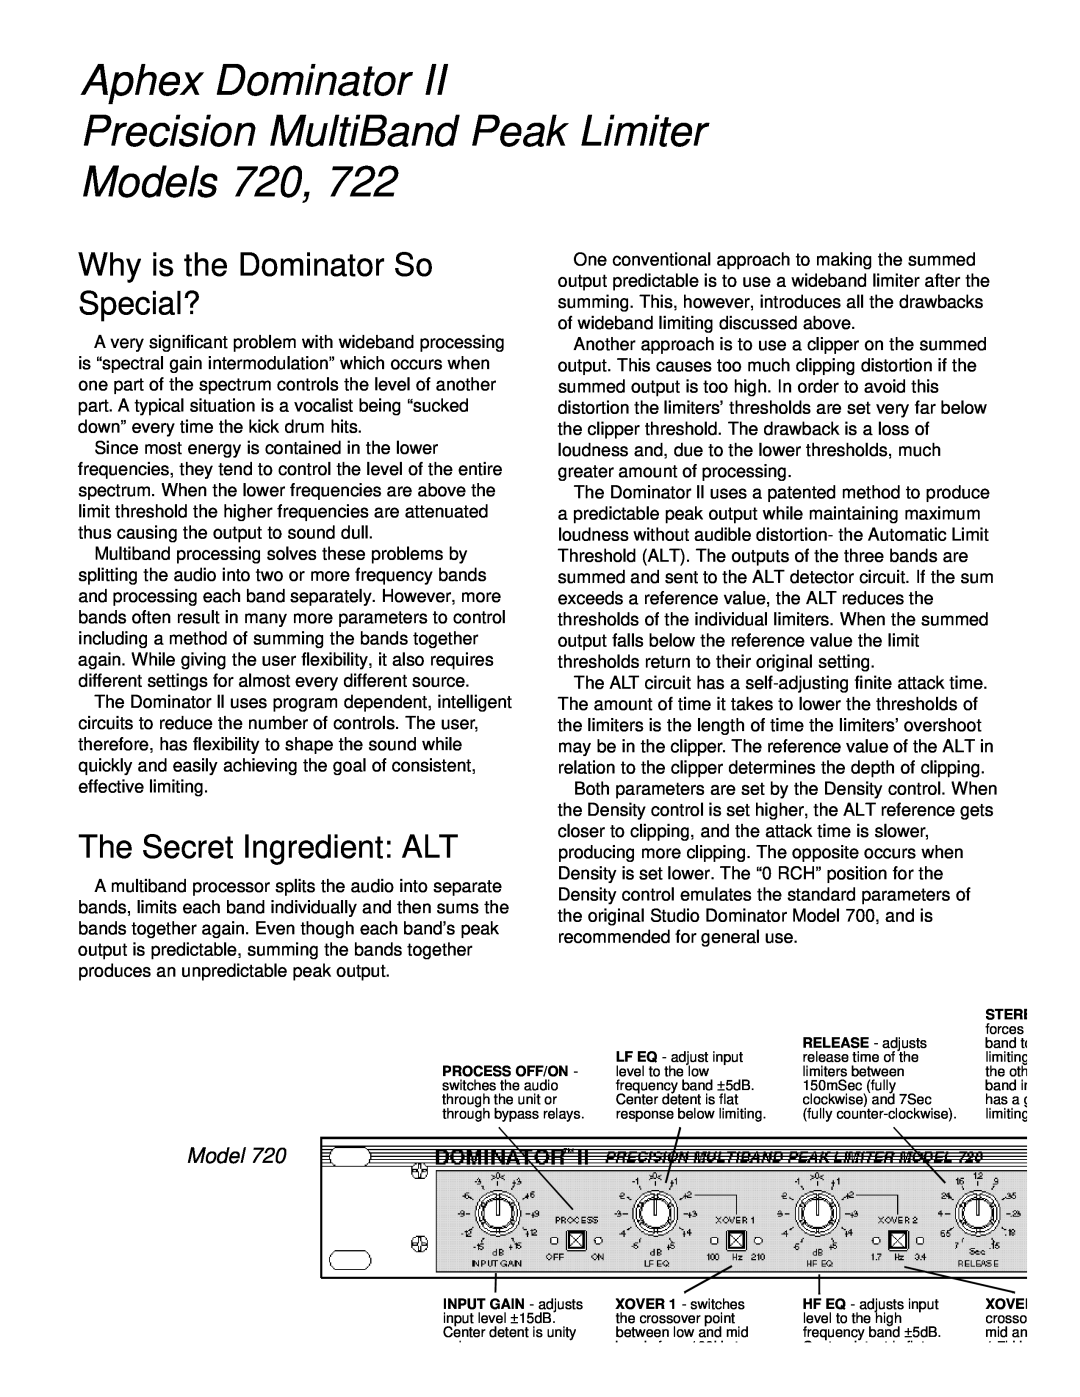 Aphex Systems 722, 720 manual Aphex Dominator Precision MultiBand Peak Limiter, Why is the Dominator So Special?, Models 